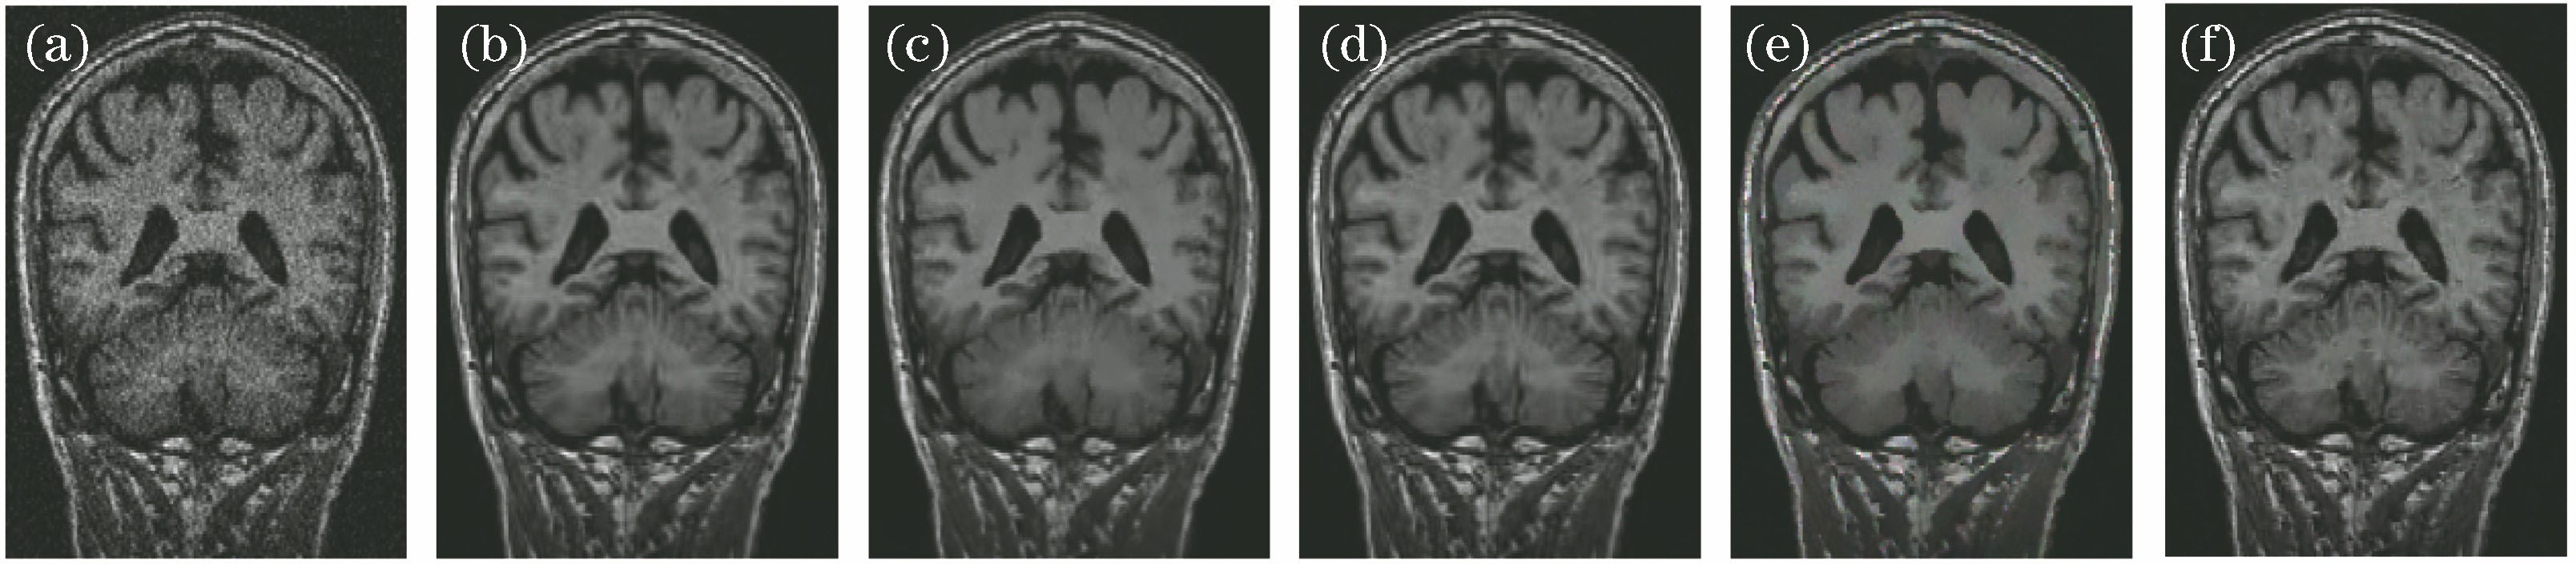 Comparison of denoising effects of noised MRI brain slices by various algorithms. (a) MRI slice with noise; (b) denoising effect by RM algorithm; (c) denoising effect by BM3D algorithm; (d) denoising effect by WSNM algorithm; (e) denoising effect by WNNM algorithm; (f) denoising effect by proposed algorithm